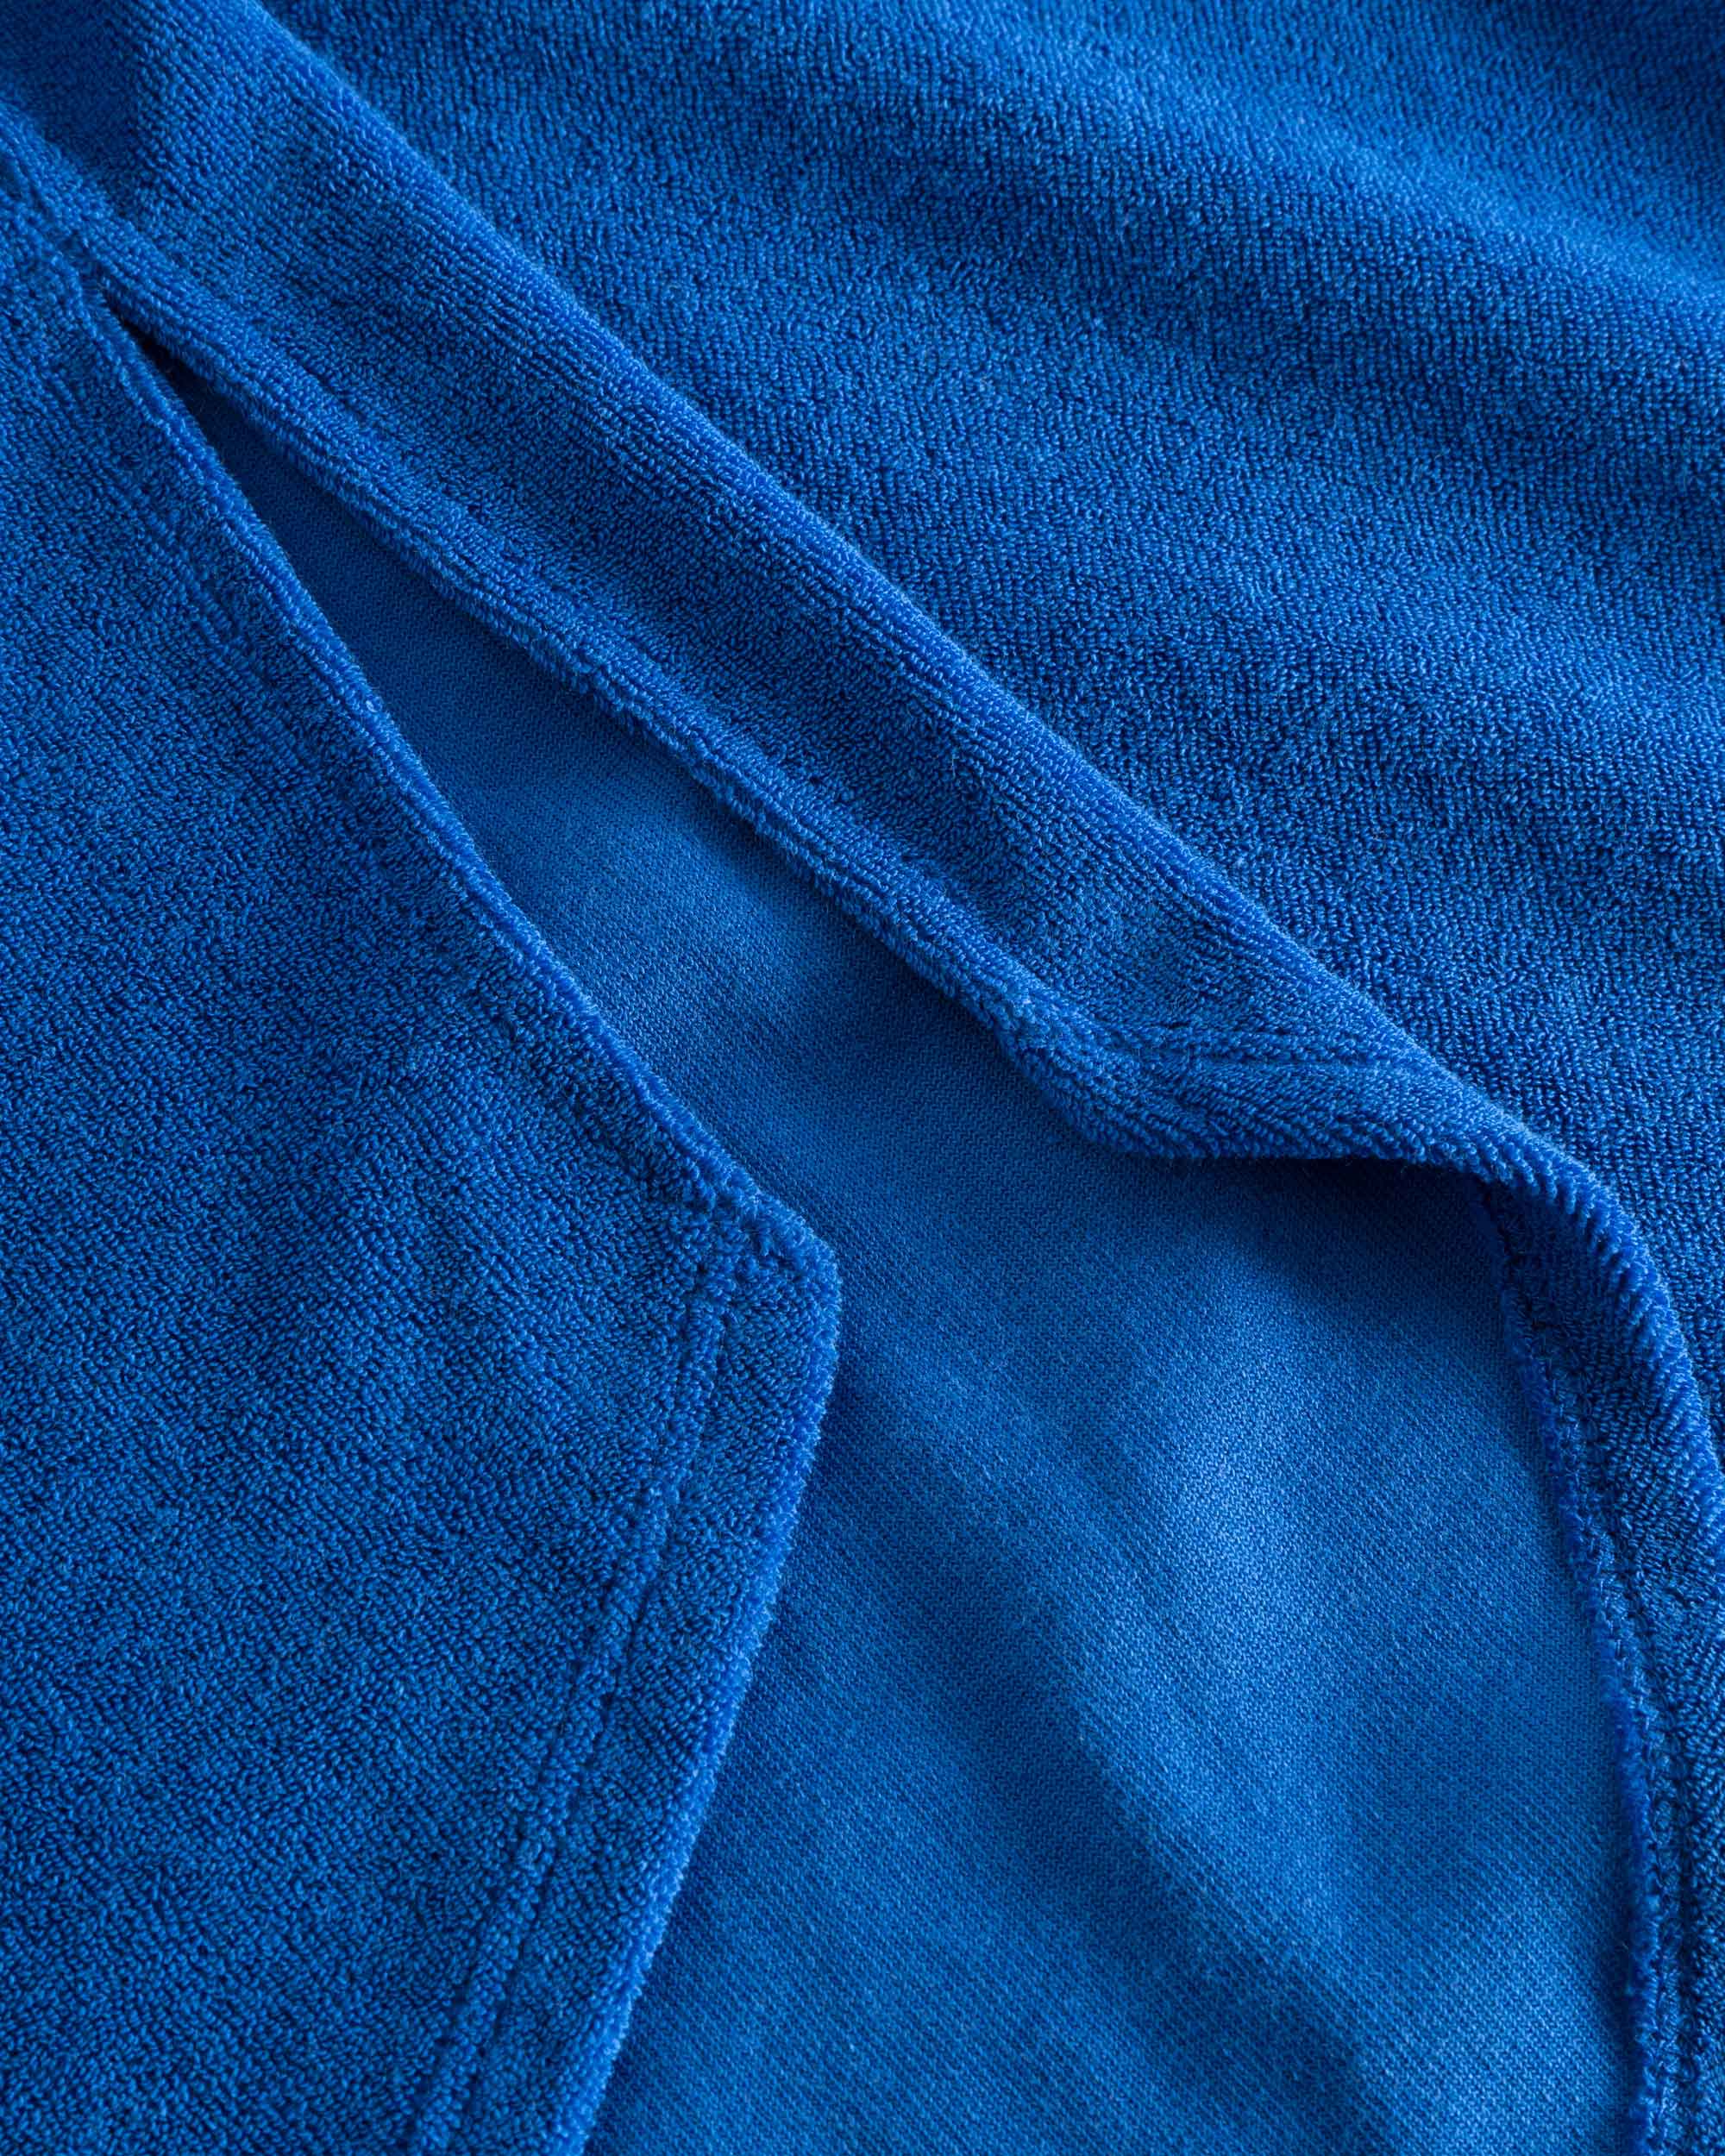 Close up on stitchings on a blue kaftan in terry toweling fabric.